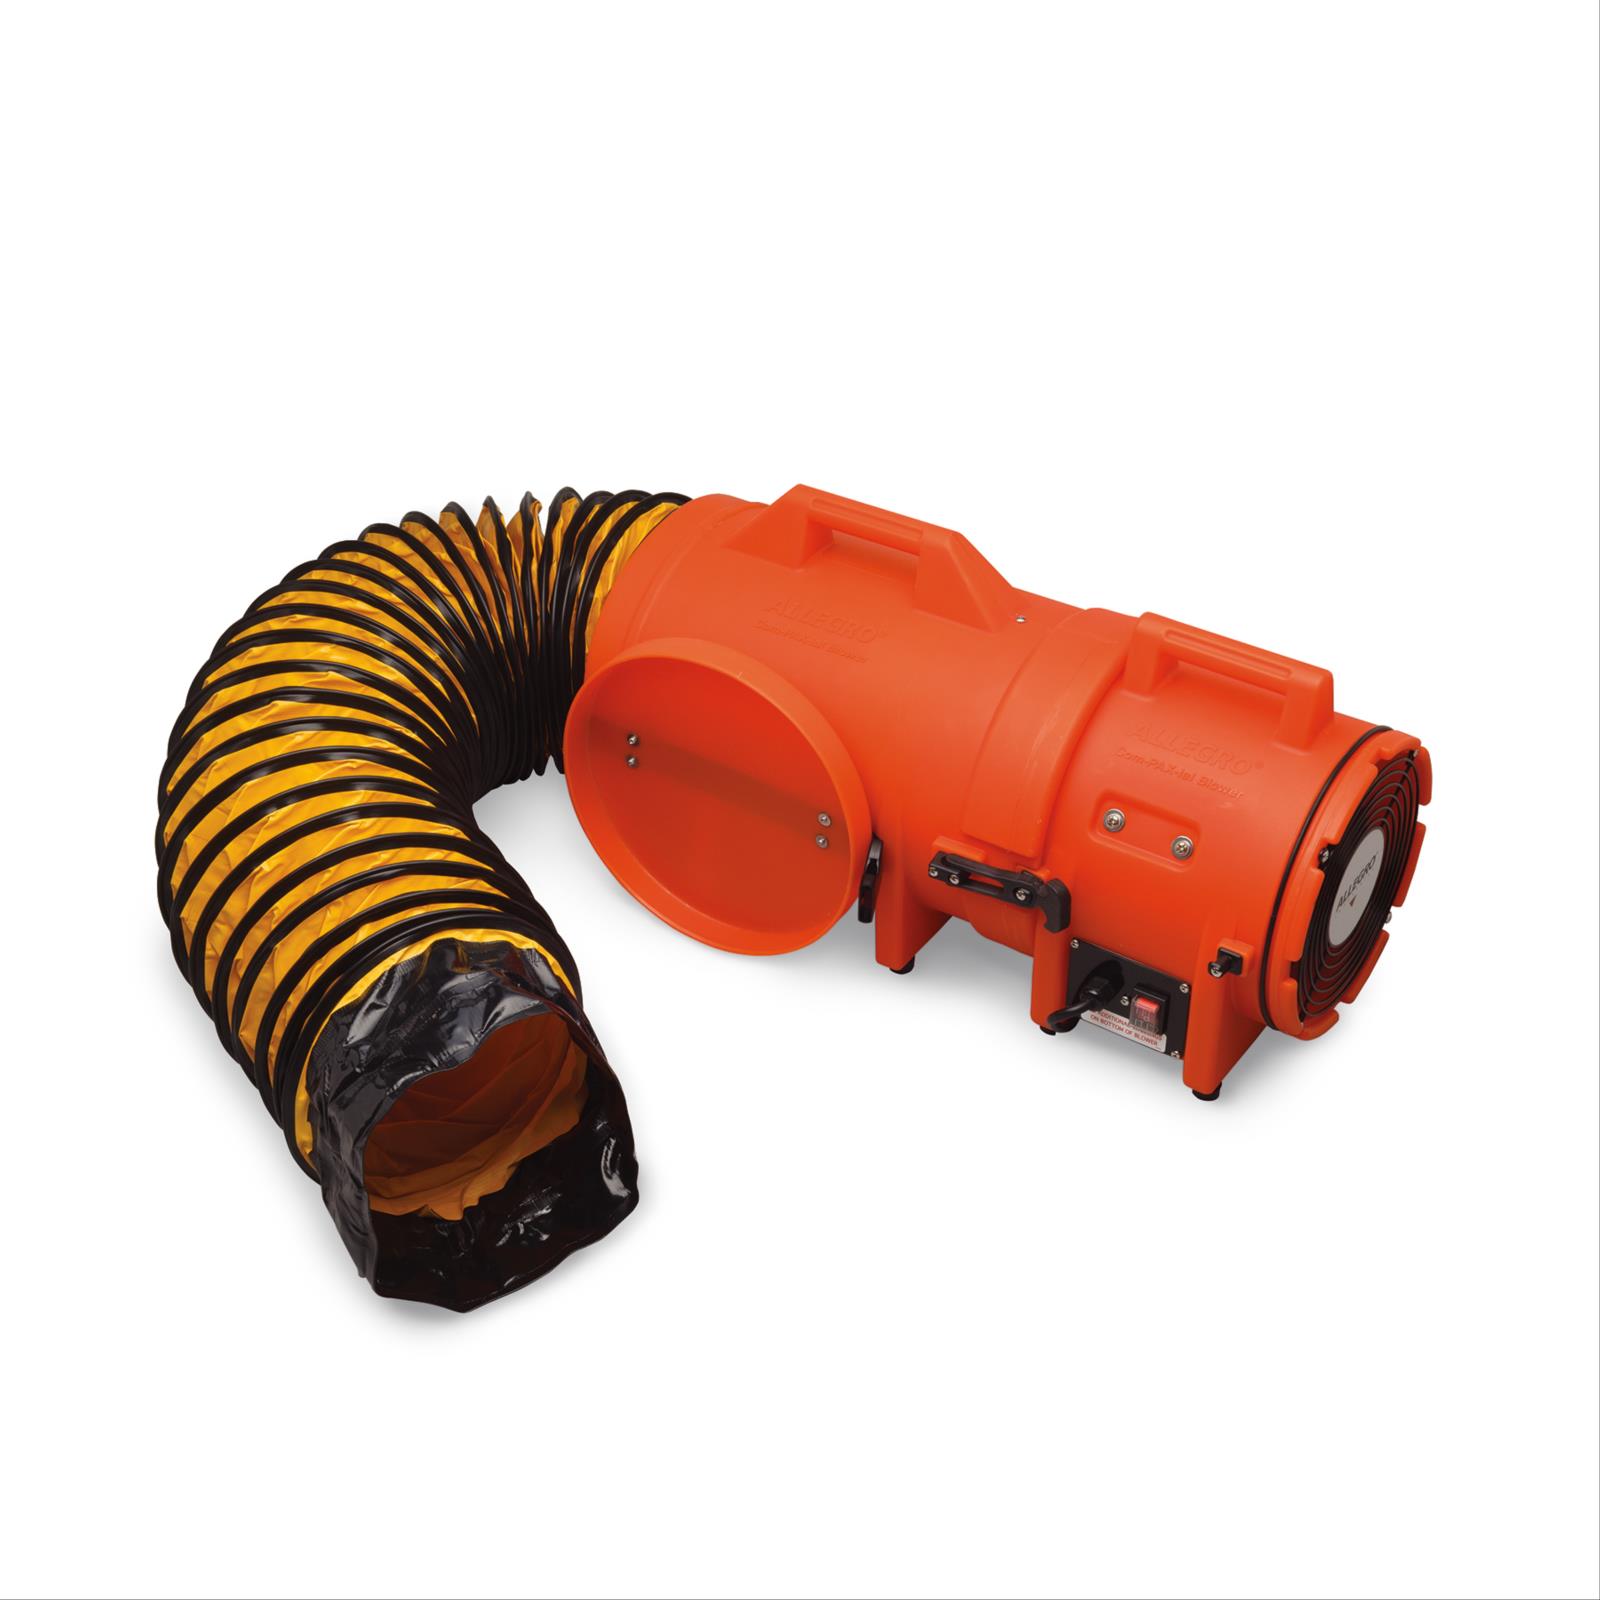 8" Axial AC Plastic Blowers